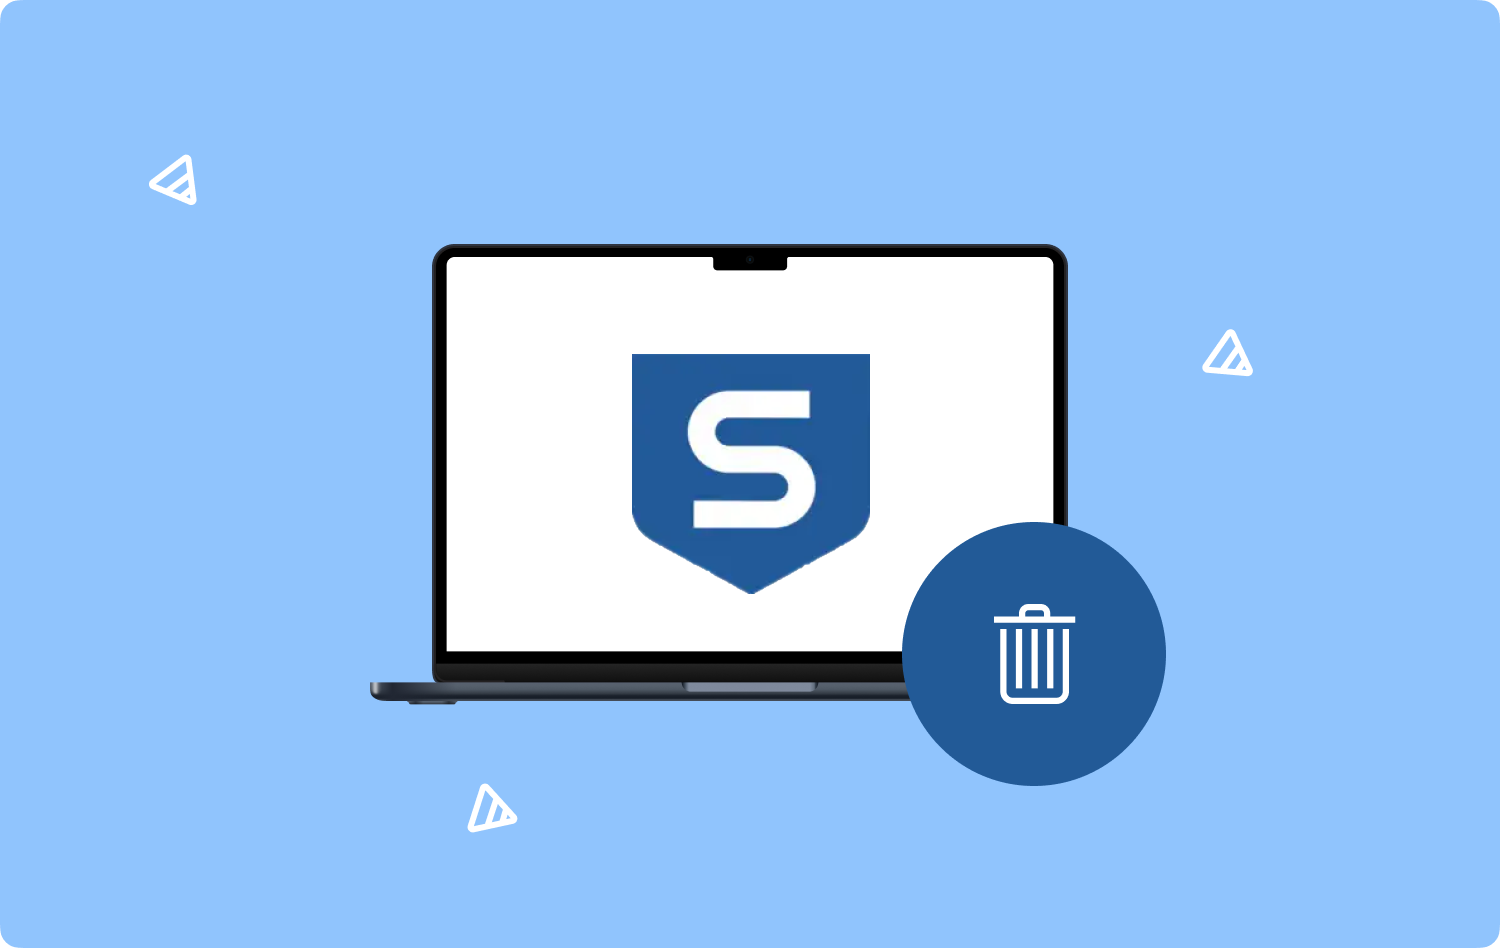 How to Uninstall Sophos on Mac